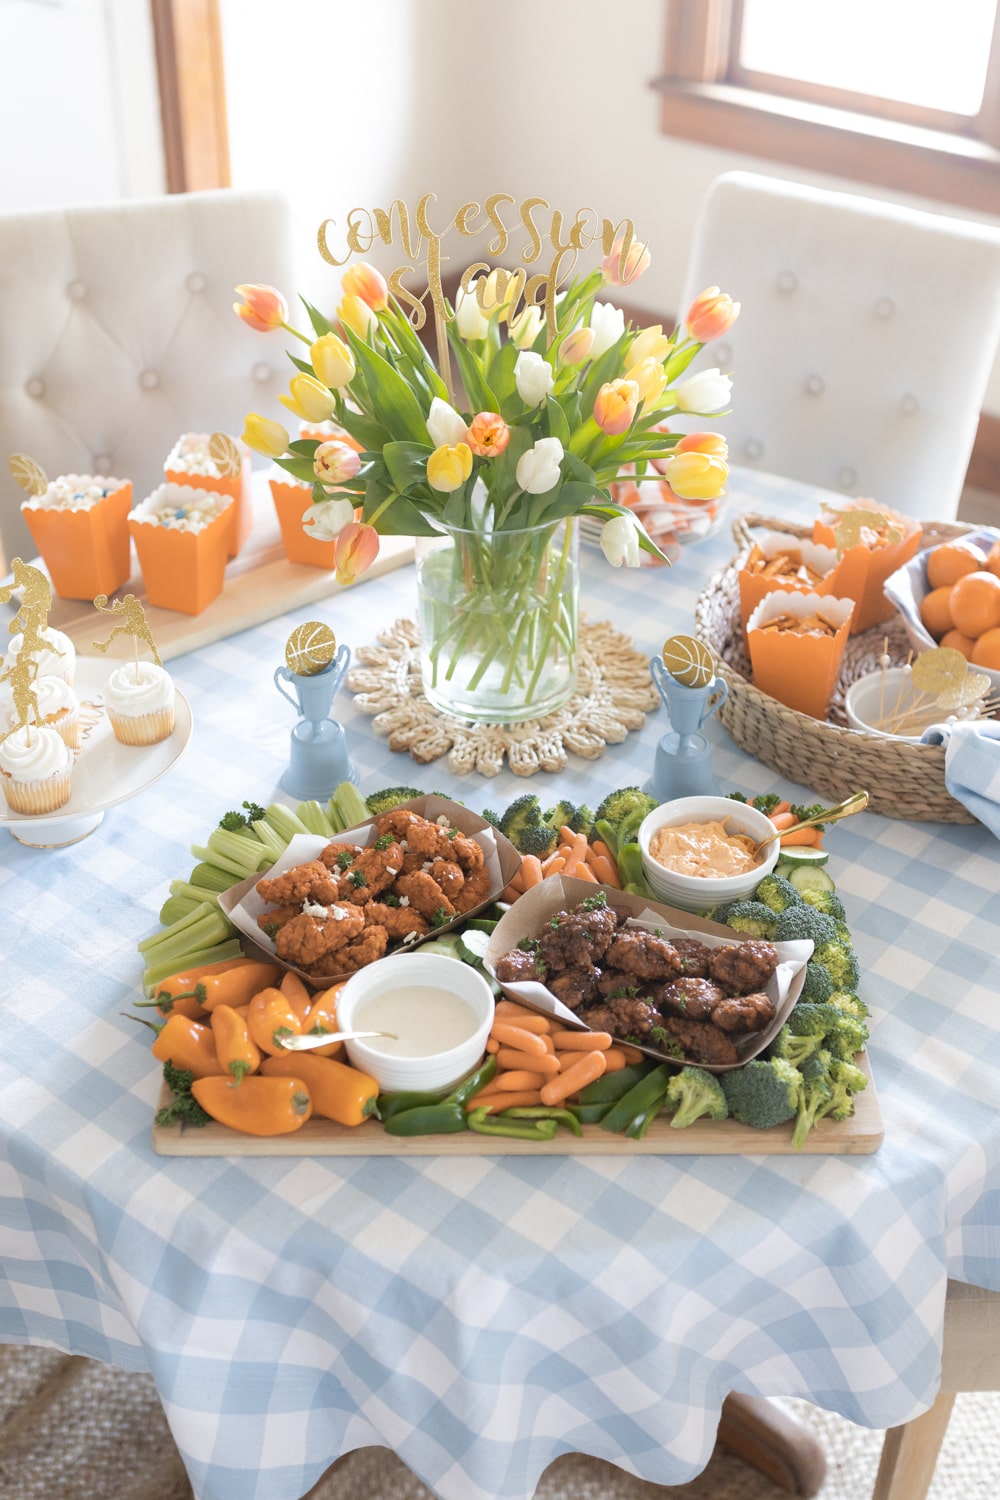 Blogger Stephanie Ziajka shares ideas for a March Madness party on Diary of a Debutante